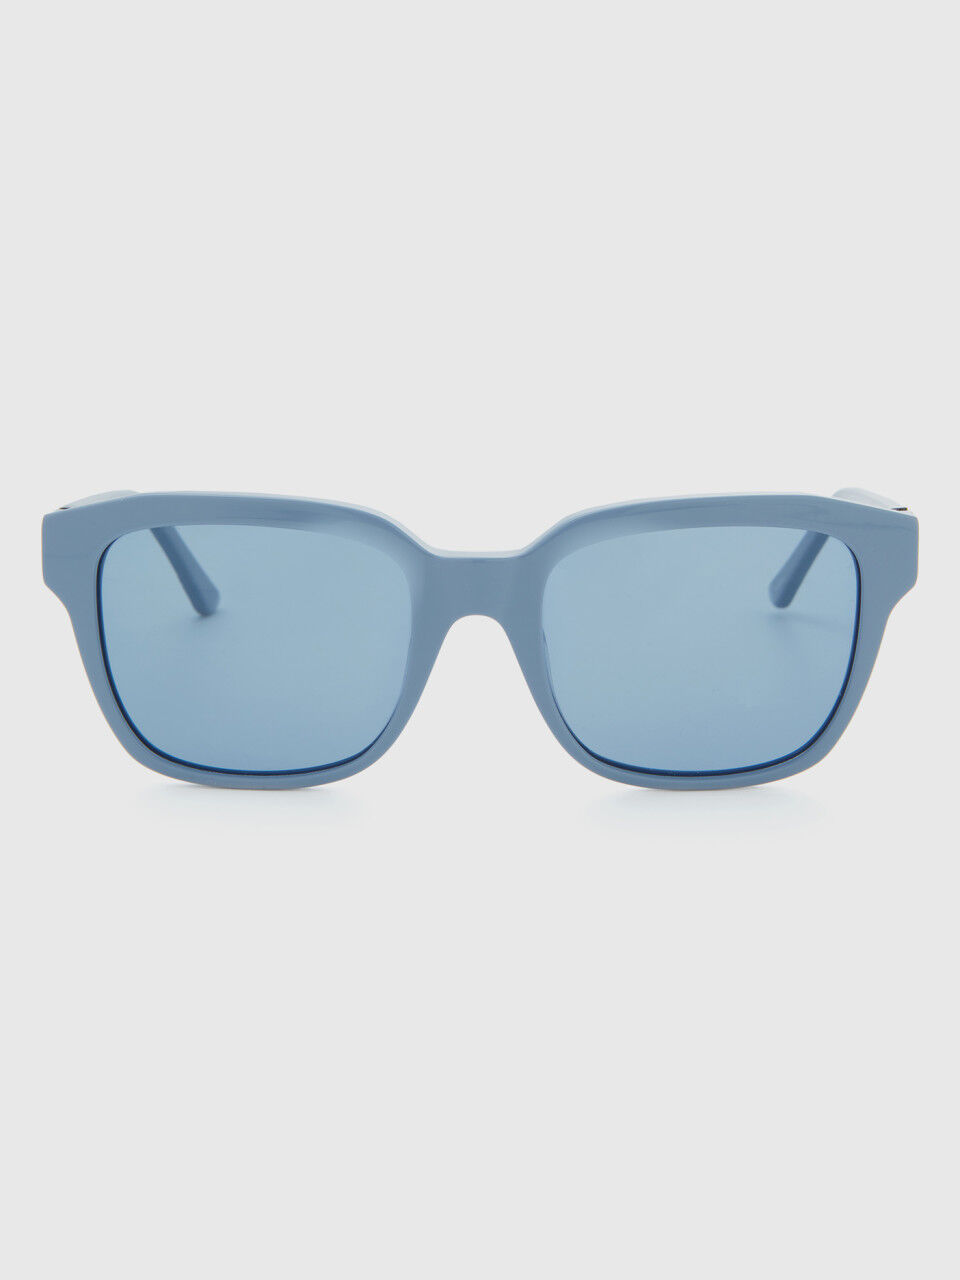 Air force blue sunglasses with logo